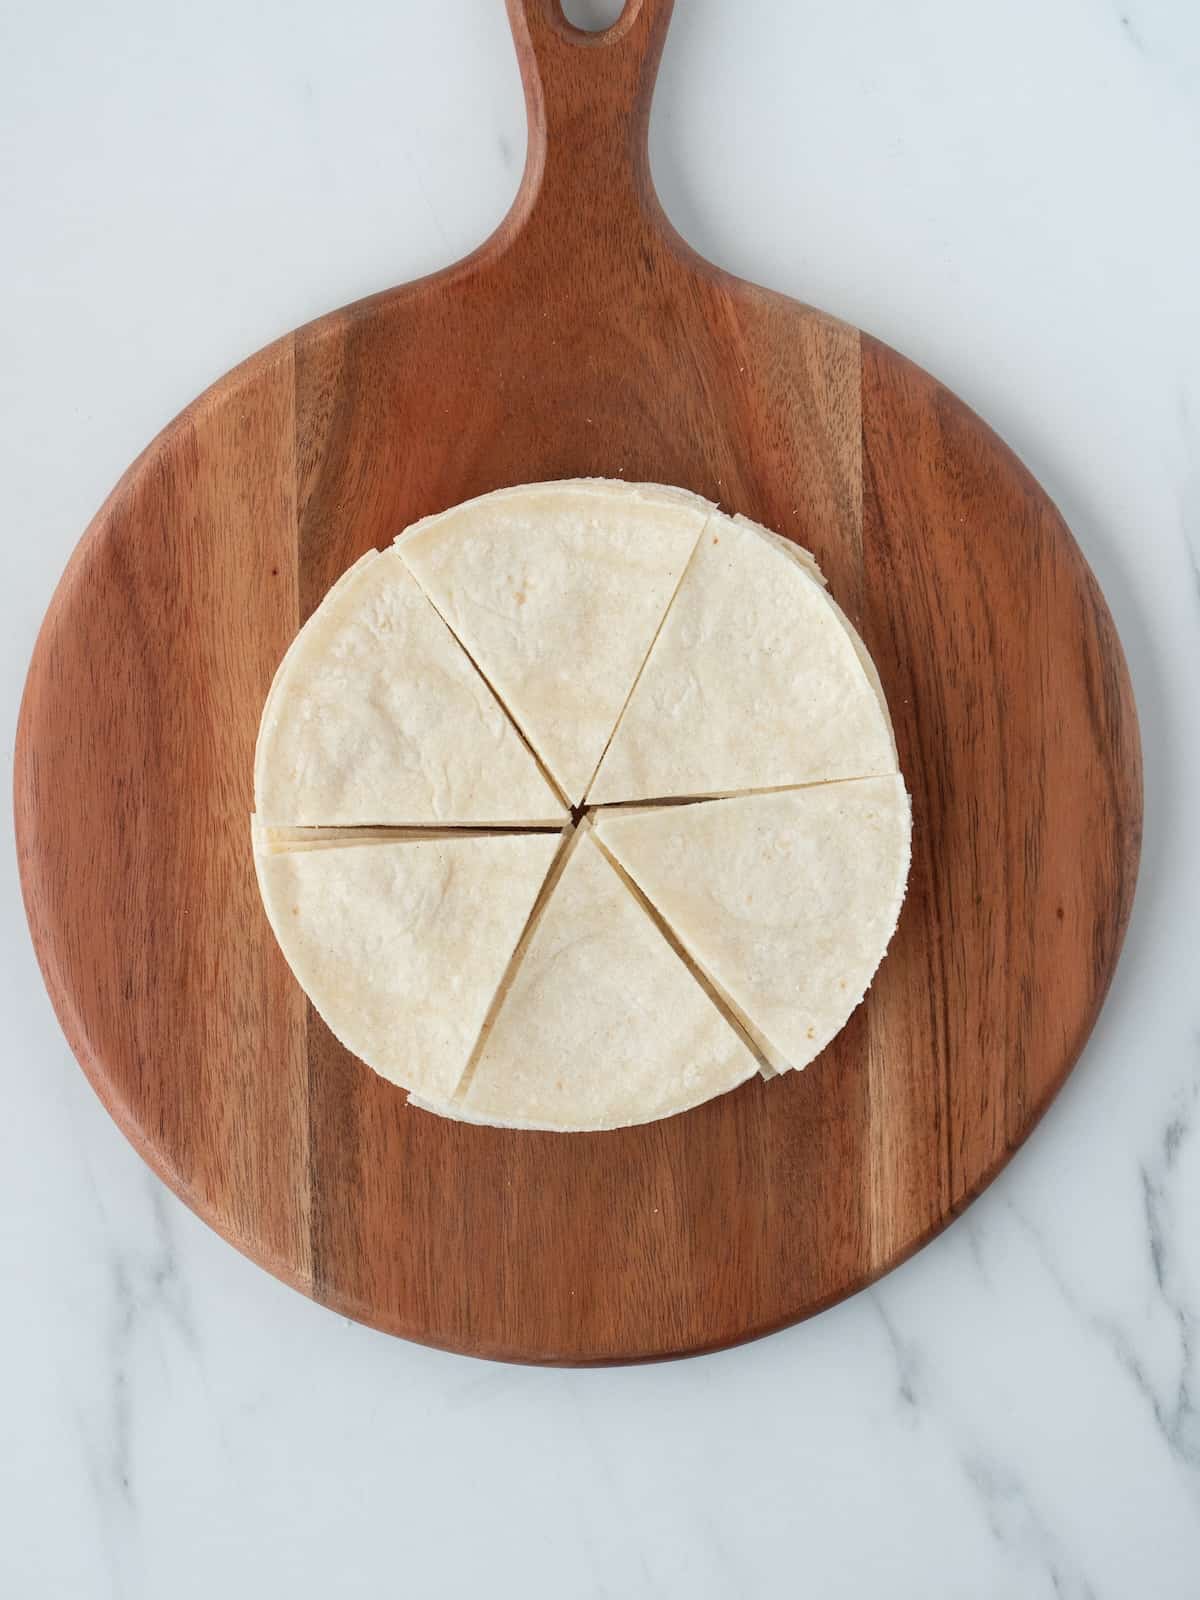 A wooden board with stack of tortillas, cut into ⅙th triangle pieces.